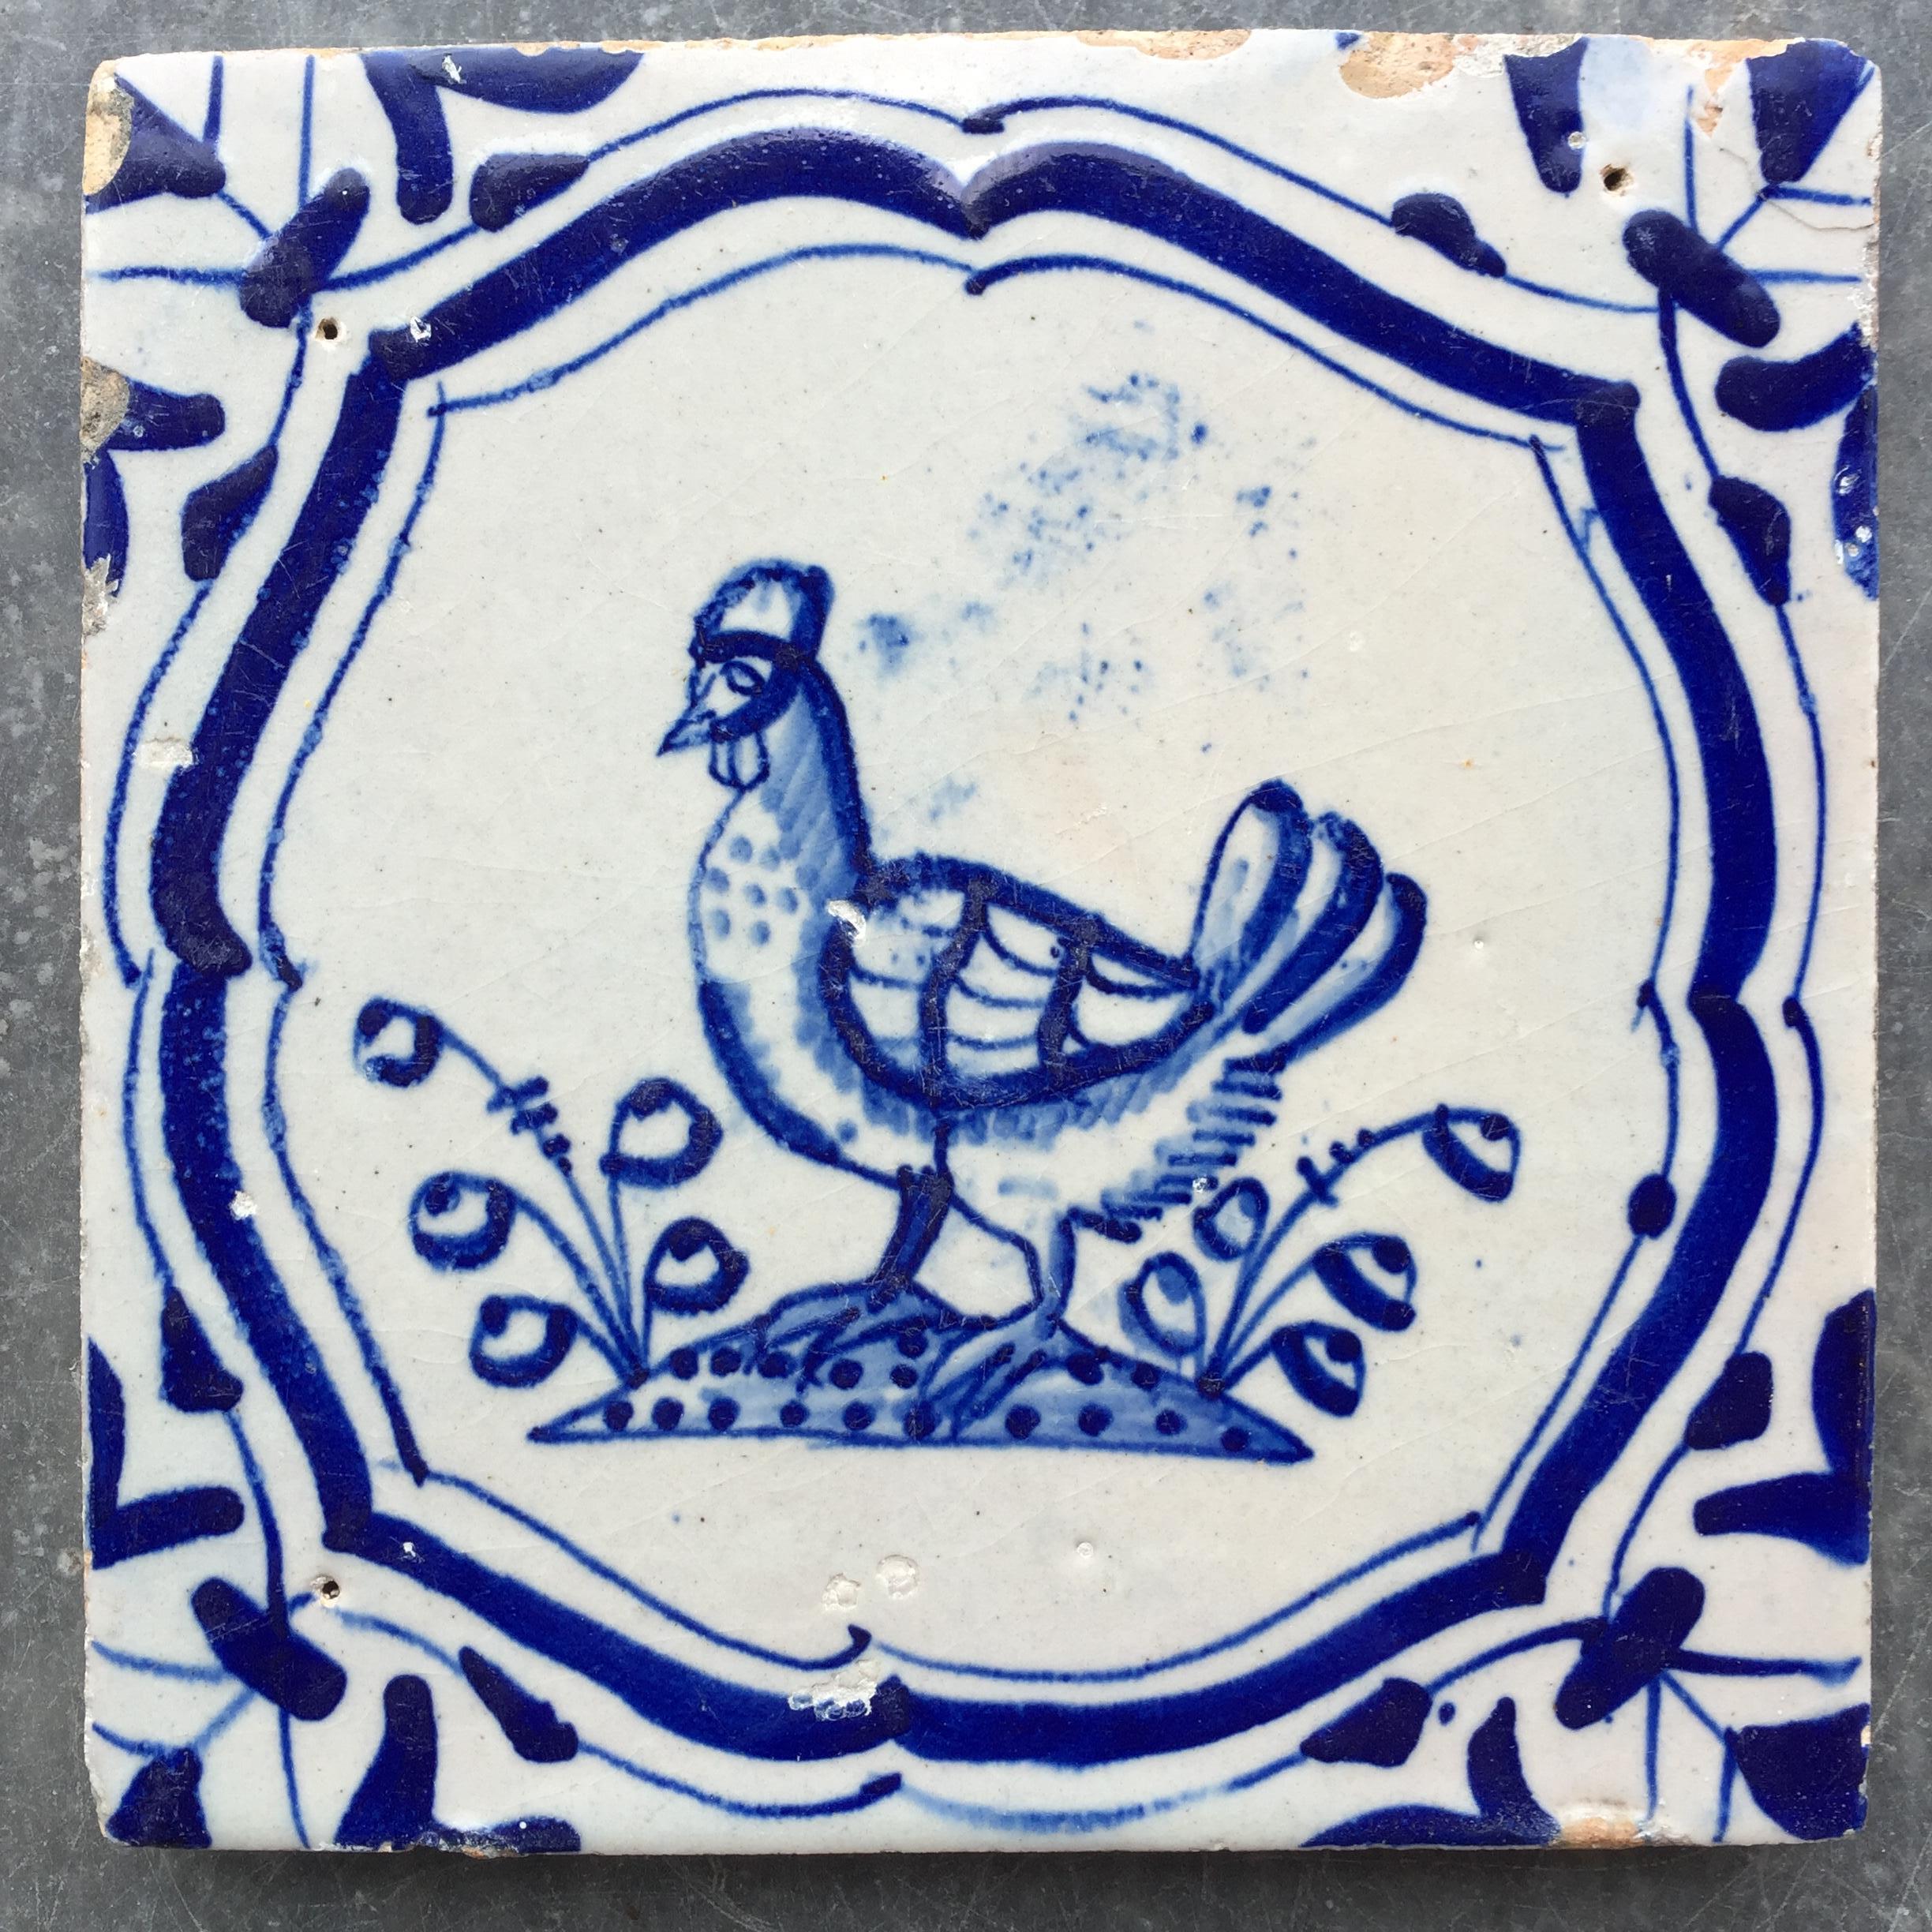 Ceramic Two Rare Dutch Delft Tile with Rooster and Chicken, 17th Century